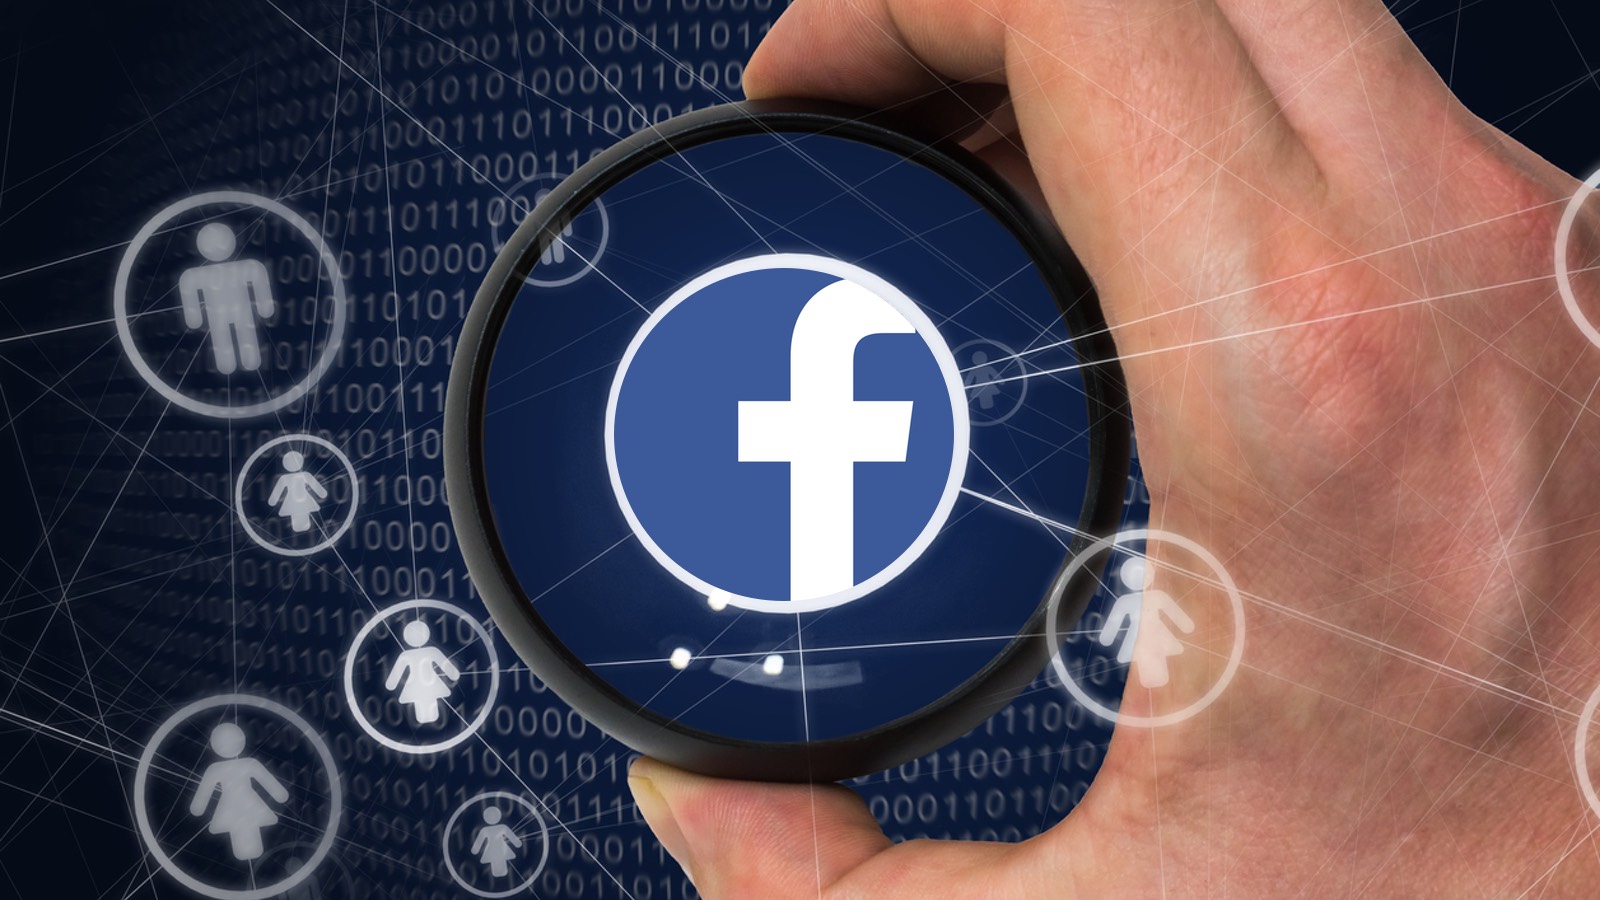 Facebook’s ‘Free’ VPN Is Basically Spyware